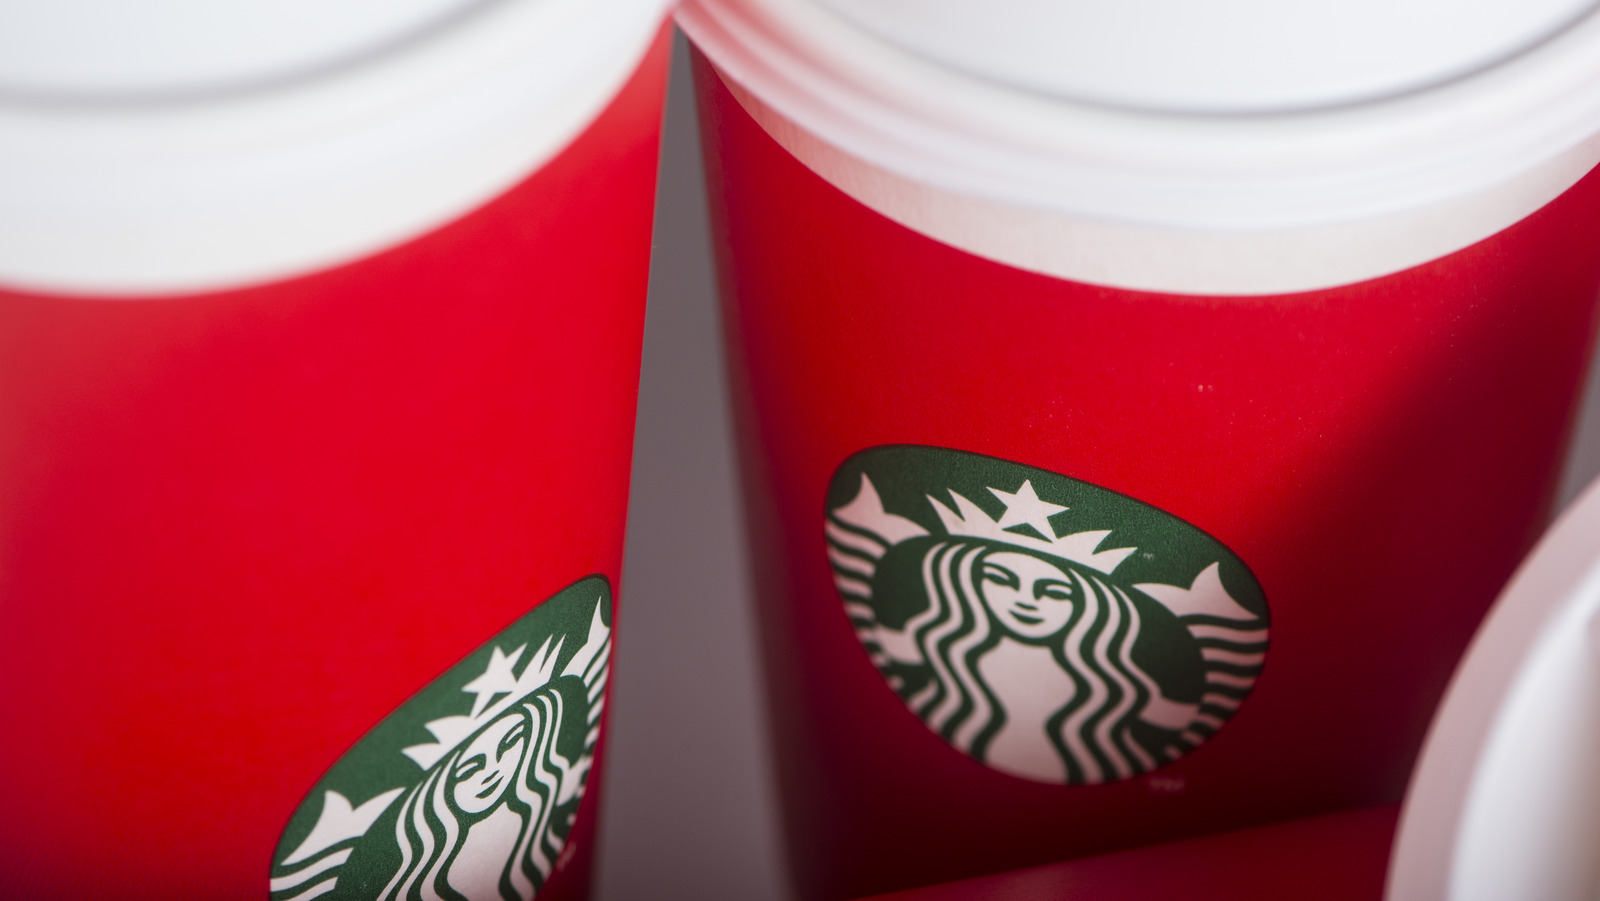 https://www.tastingtable.com/img/gallery/the-secret-menu-starbucks-candy-cane-cold-brew-you-need-this-winter/l-intro-1699254902.jpg